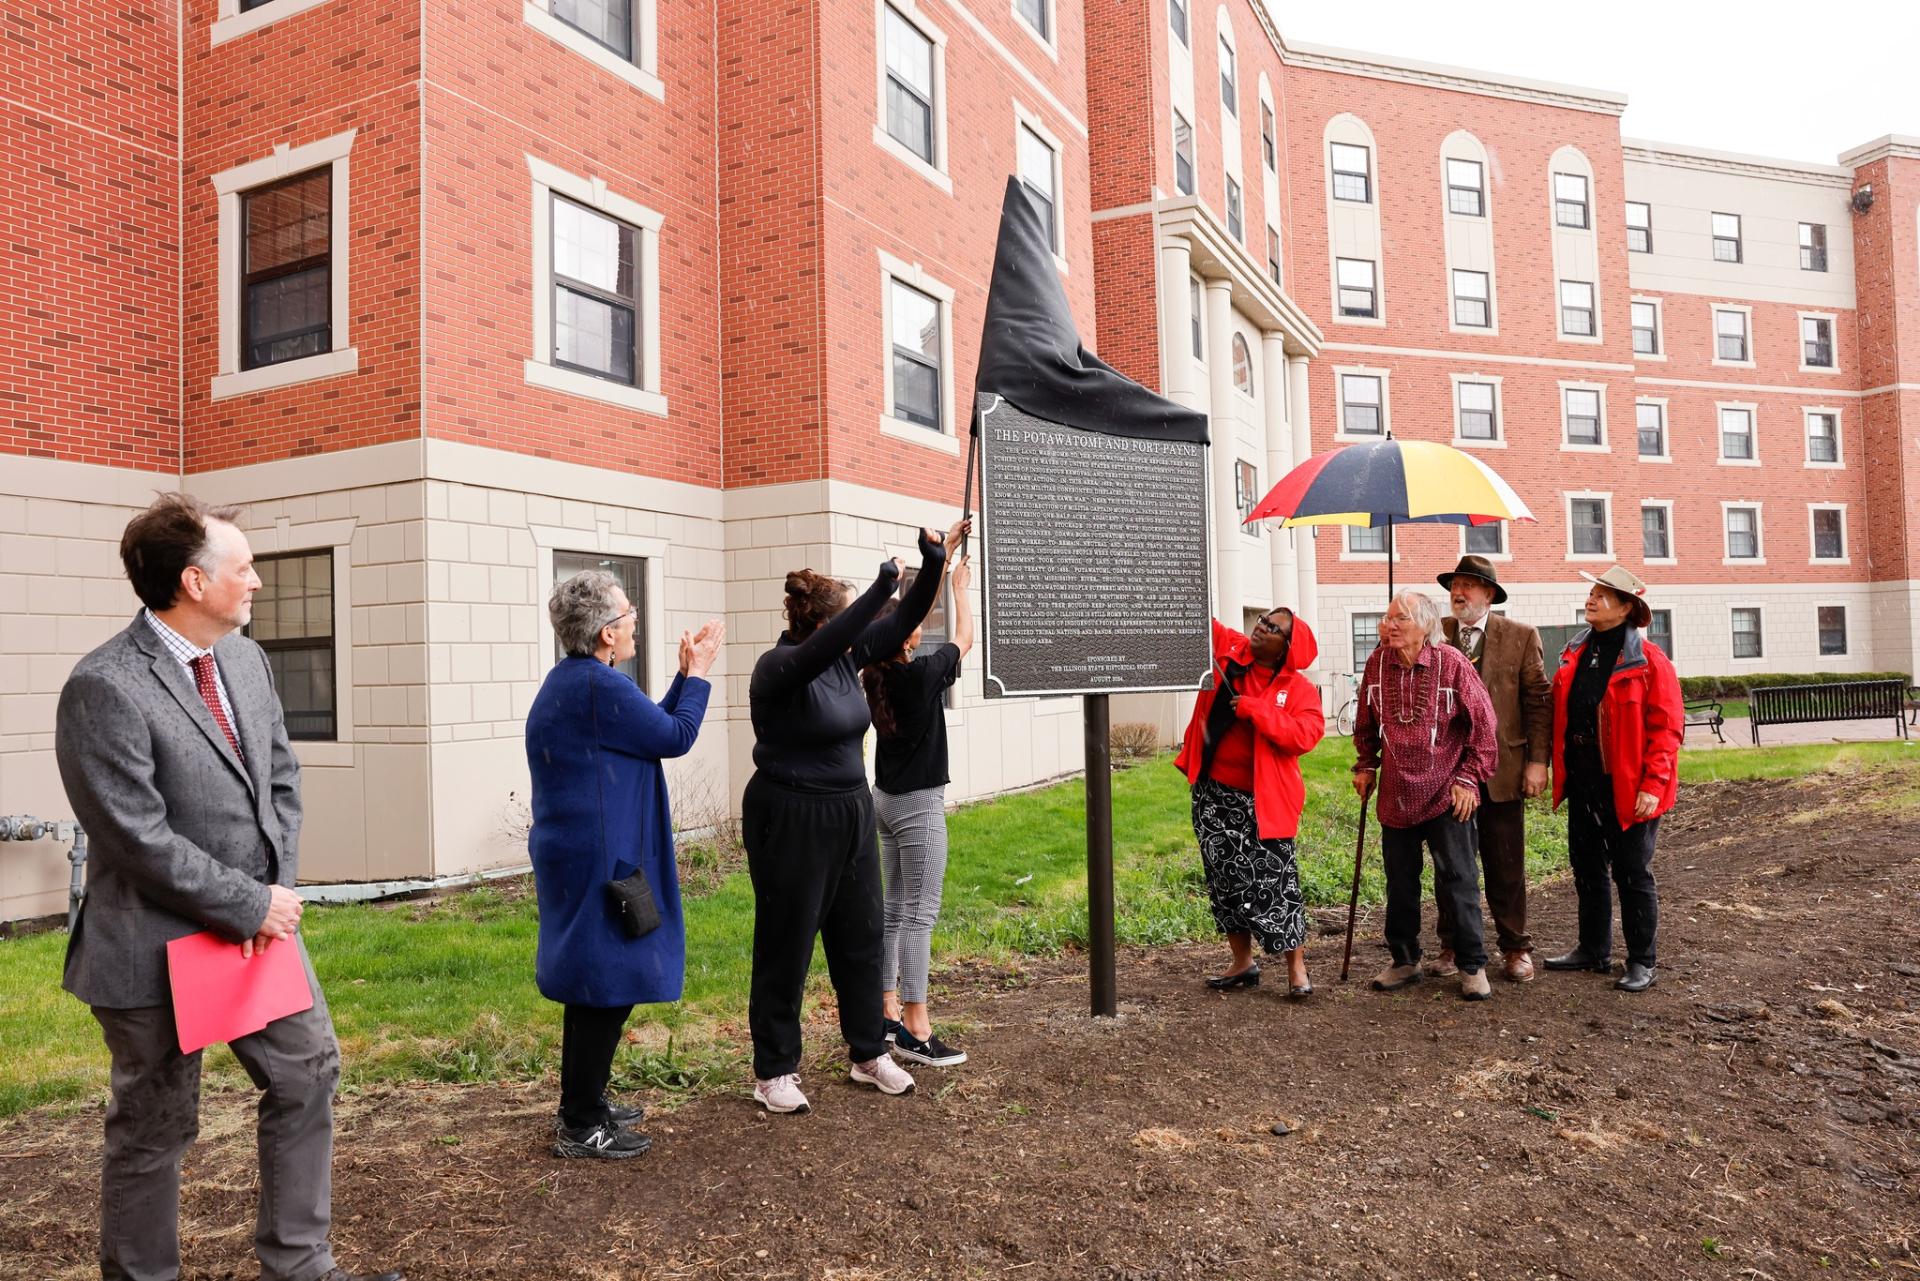 President Anita Thomas unveils the new historical marker at North Central College.